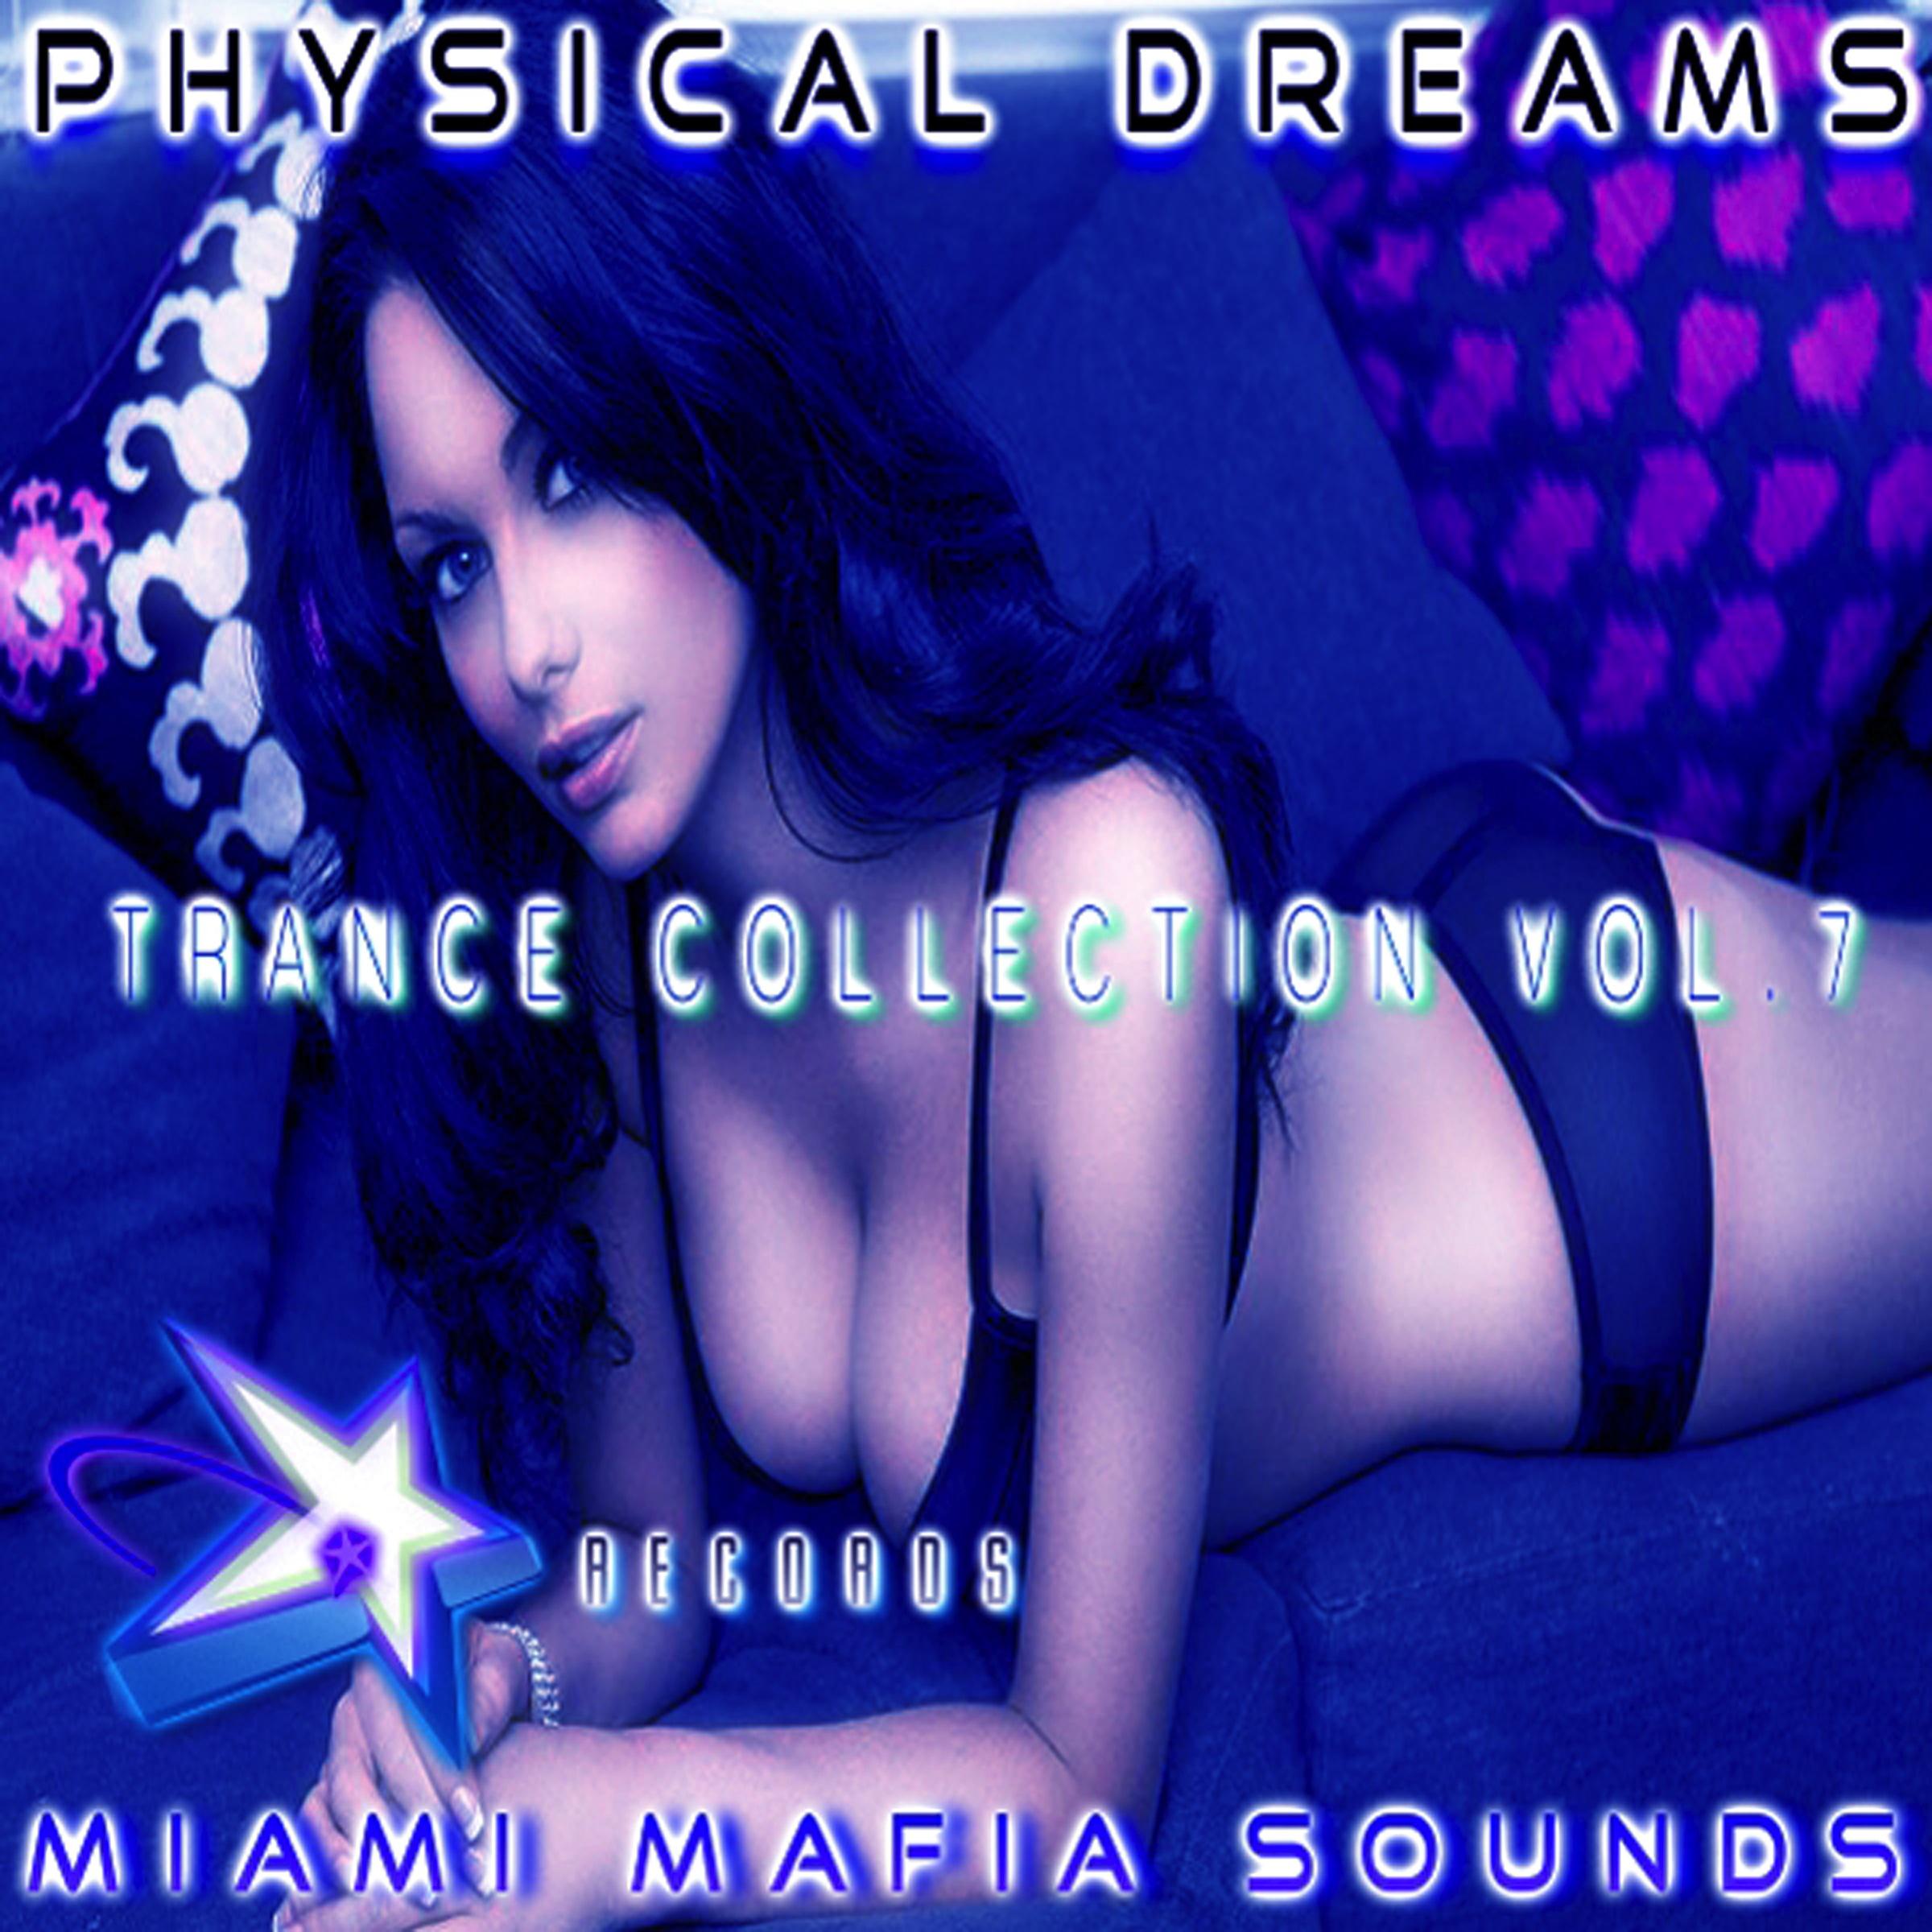 Physical Dreams Trance Collection, Vol. 7